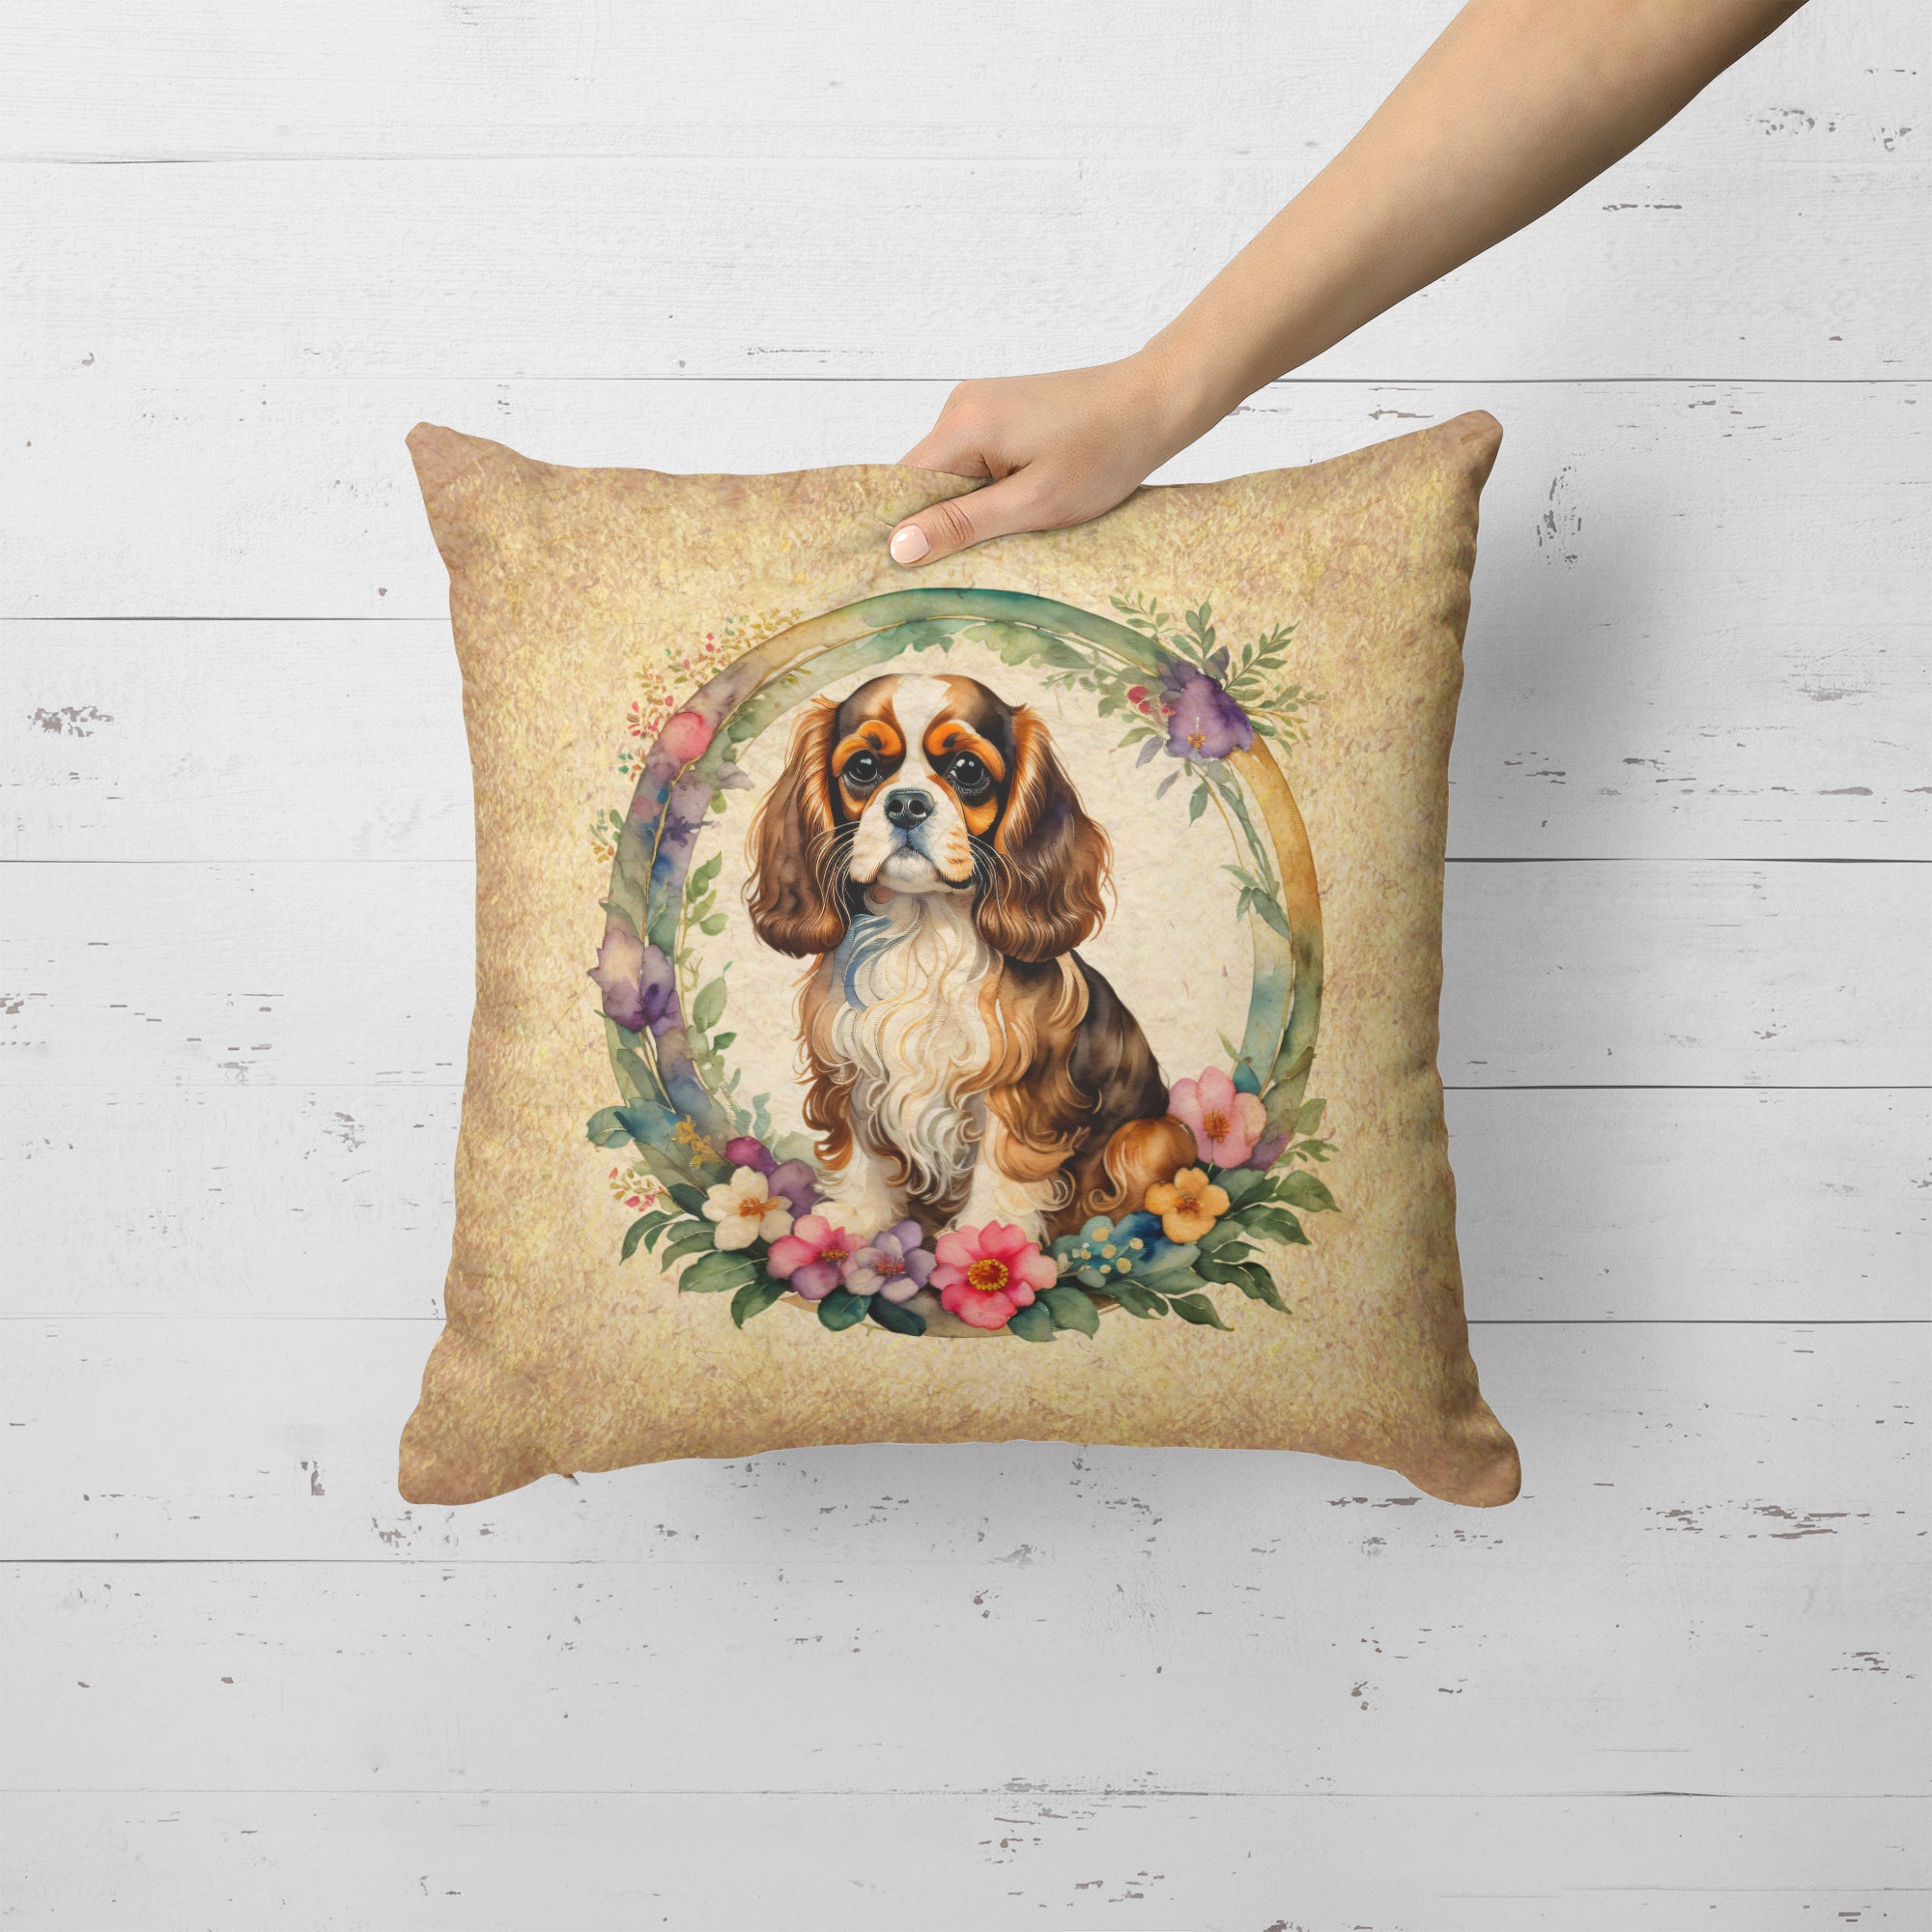 Buy this Cavalier Spaniel and Flowers Fabric Decorative Pillow